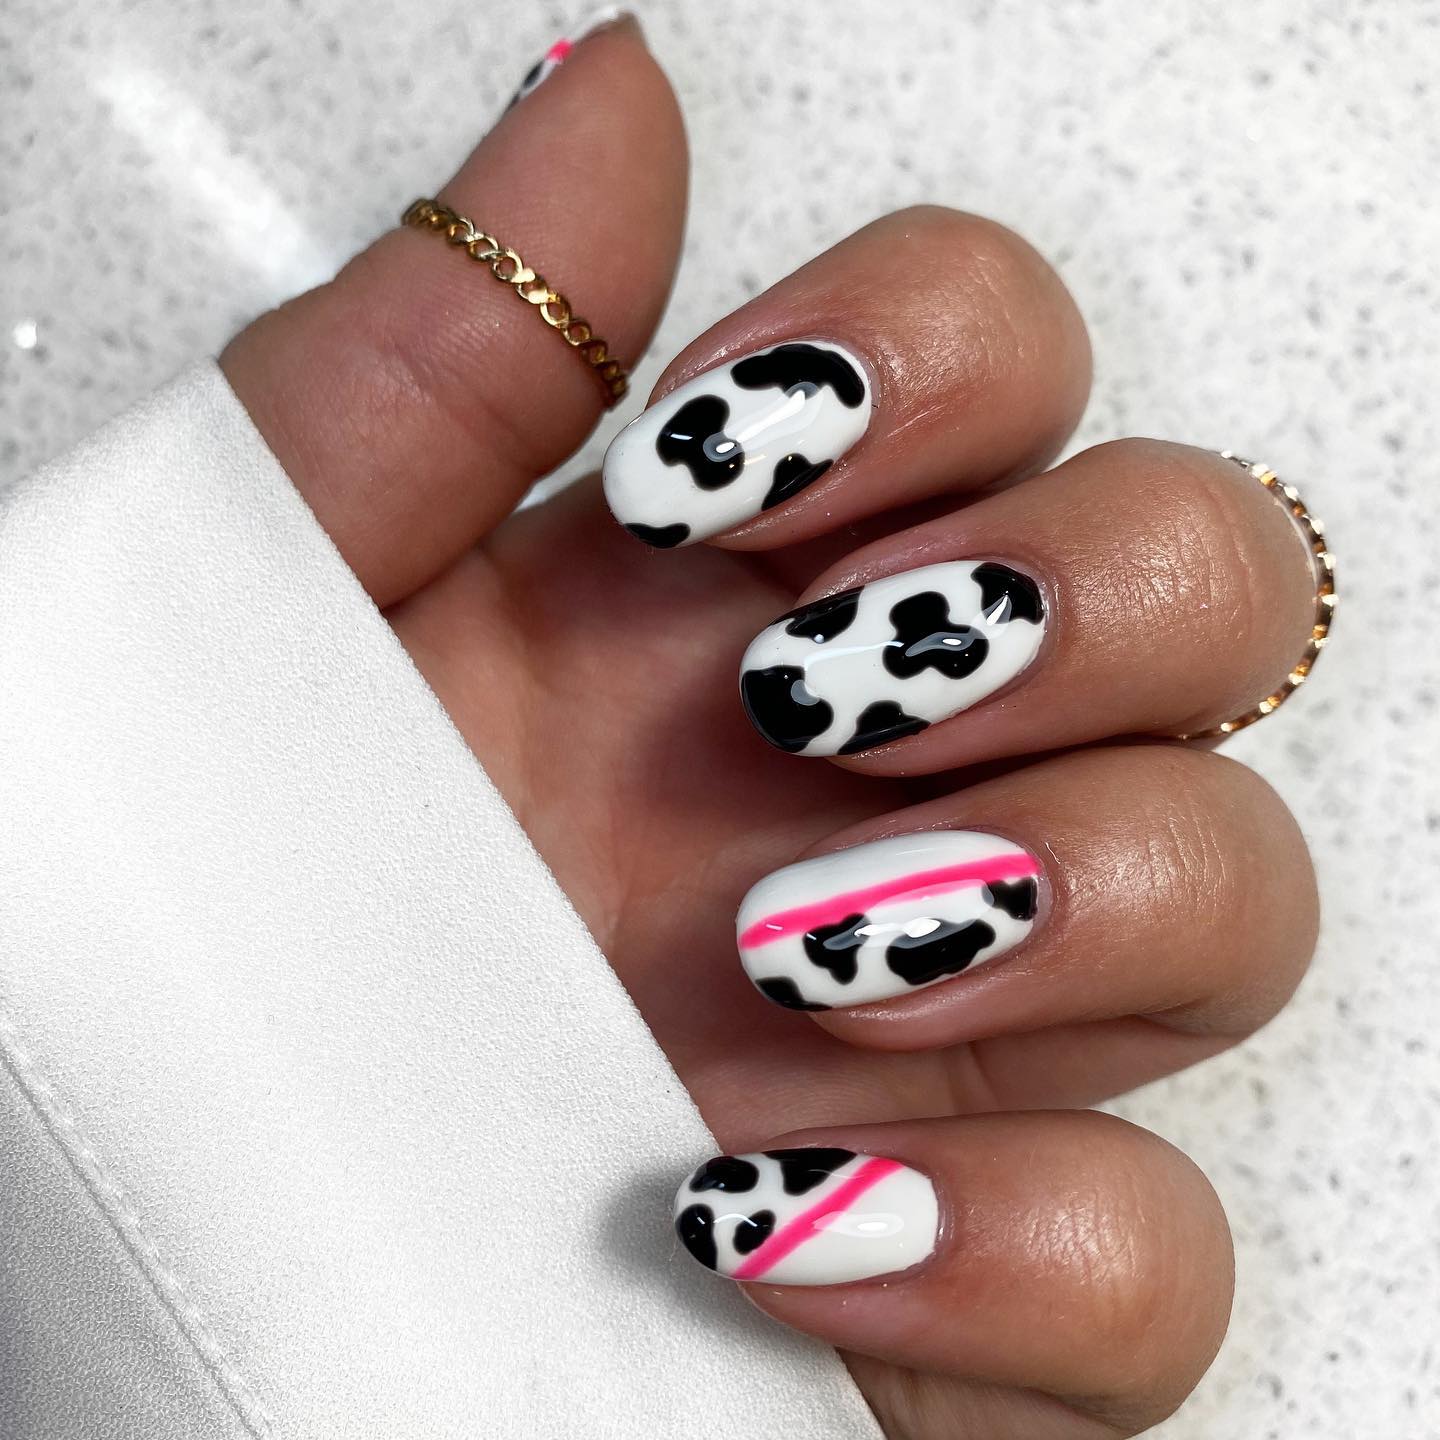 Almond cow print nails are a great way to add some dimension to your look. Plus, as for your accent nails, a pink line that separates cow prints and white nail polish. So, if you want to try something new but not too crazy, go for it.